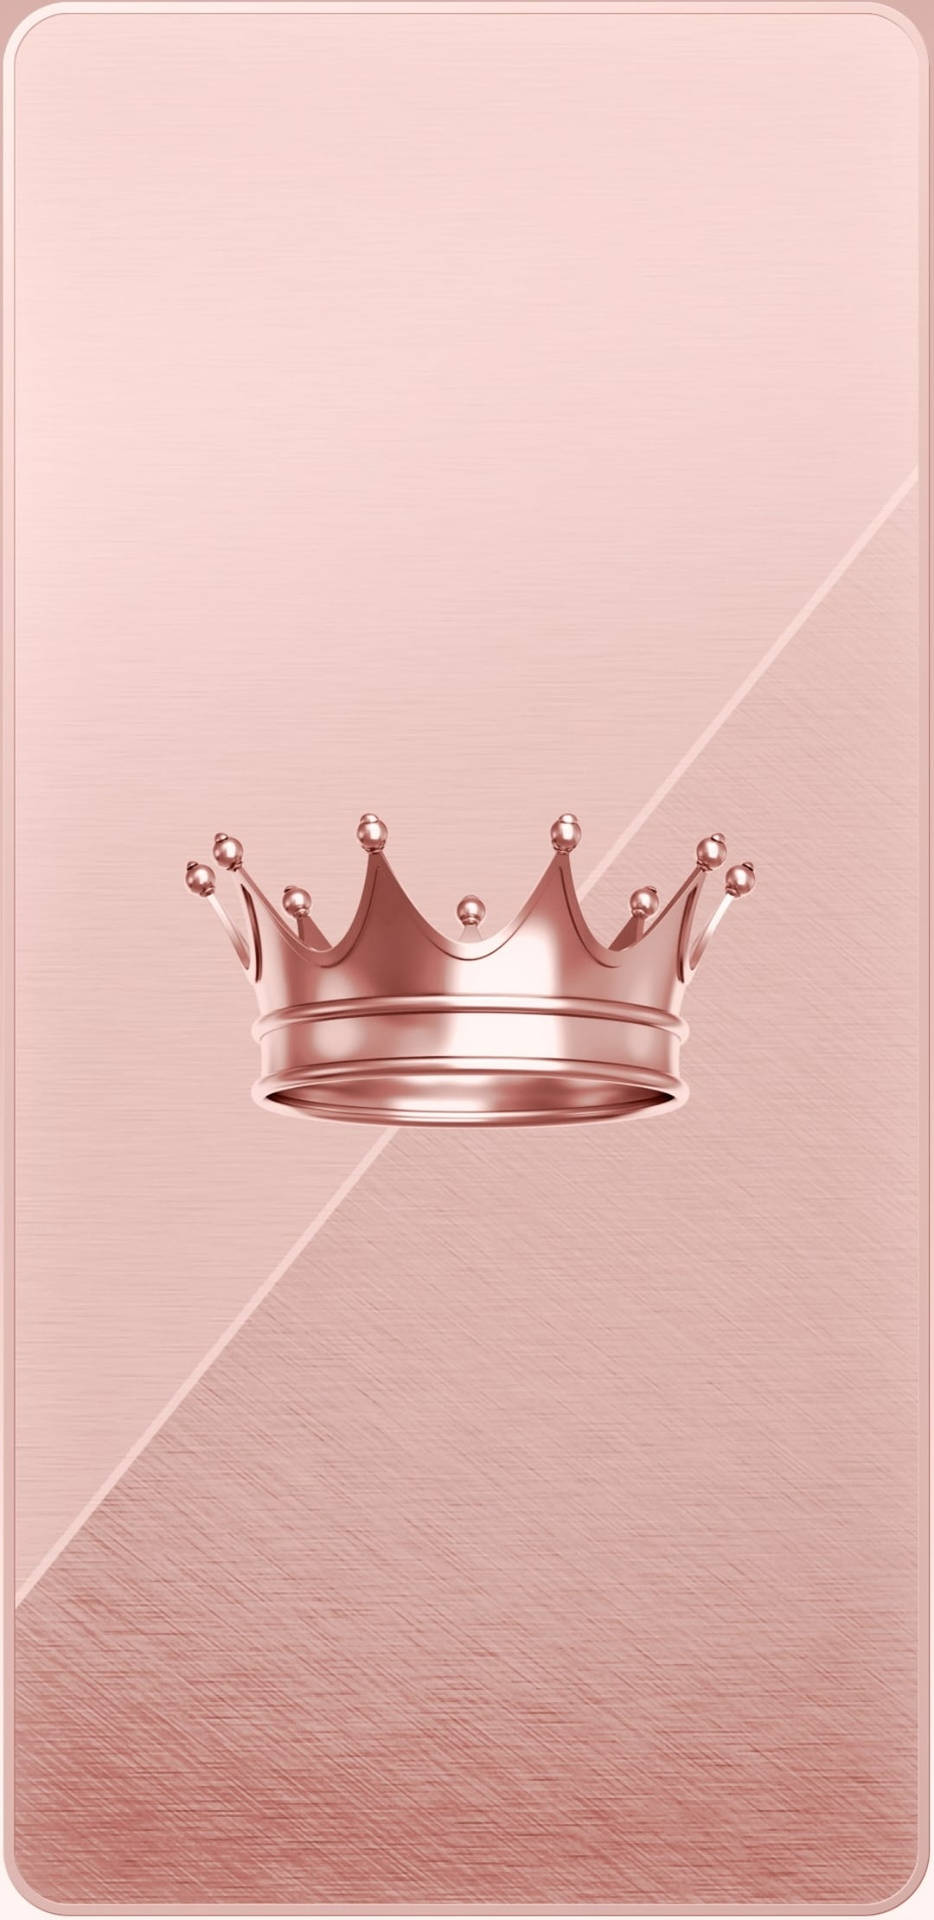 Queen Girly Rose Gold Crown Background